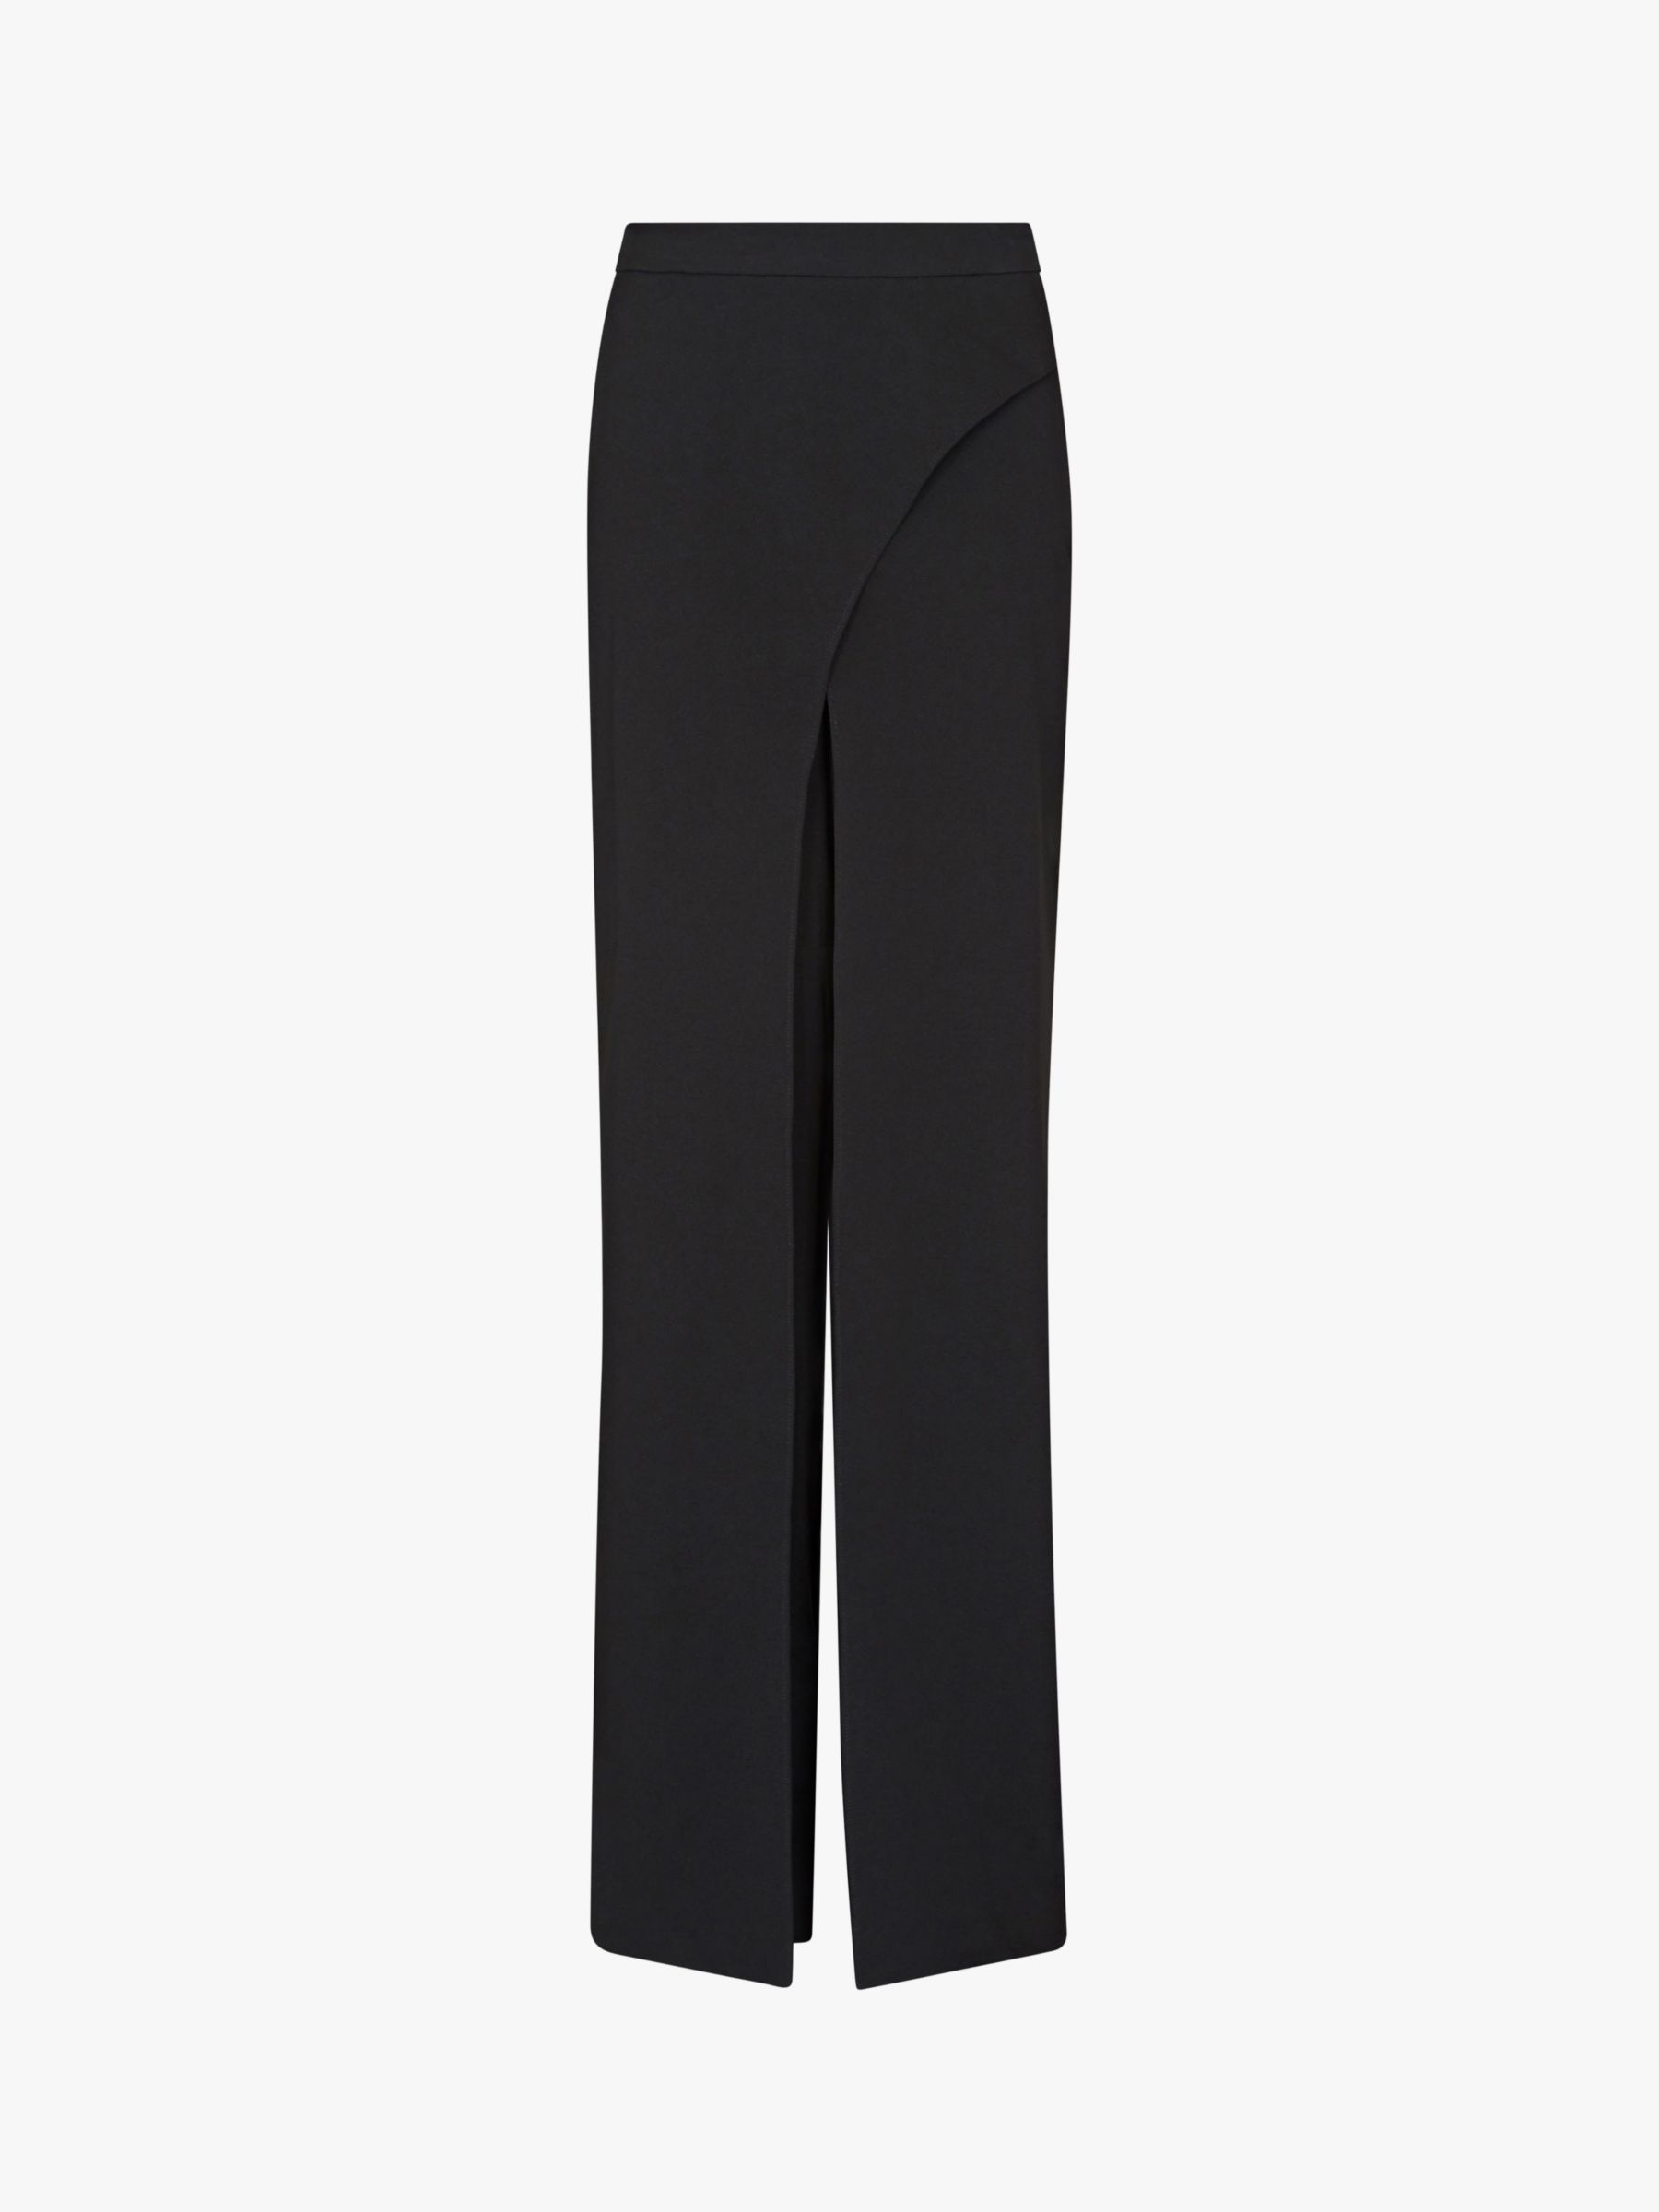 Adrianna Papell Crepe Trousers, Black, 6